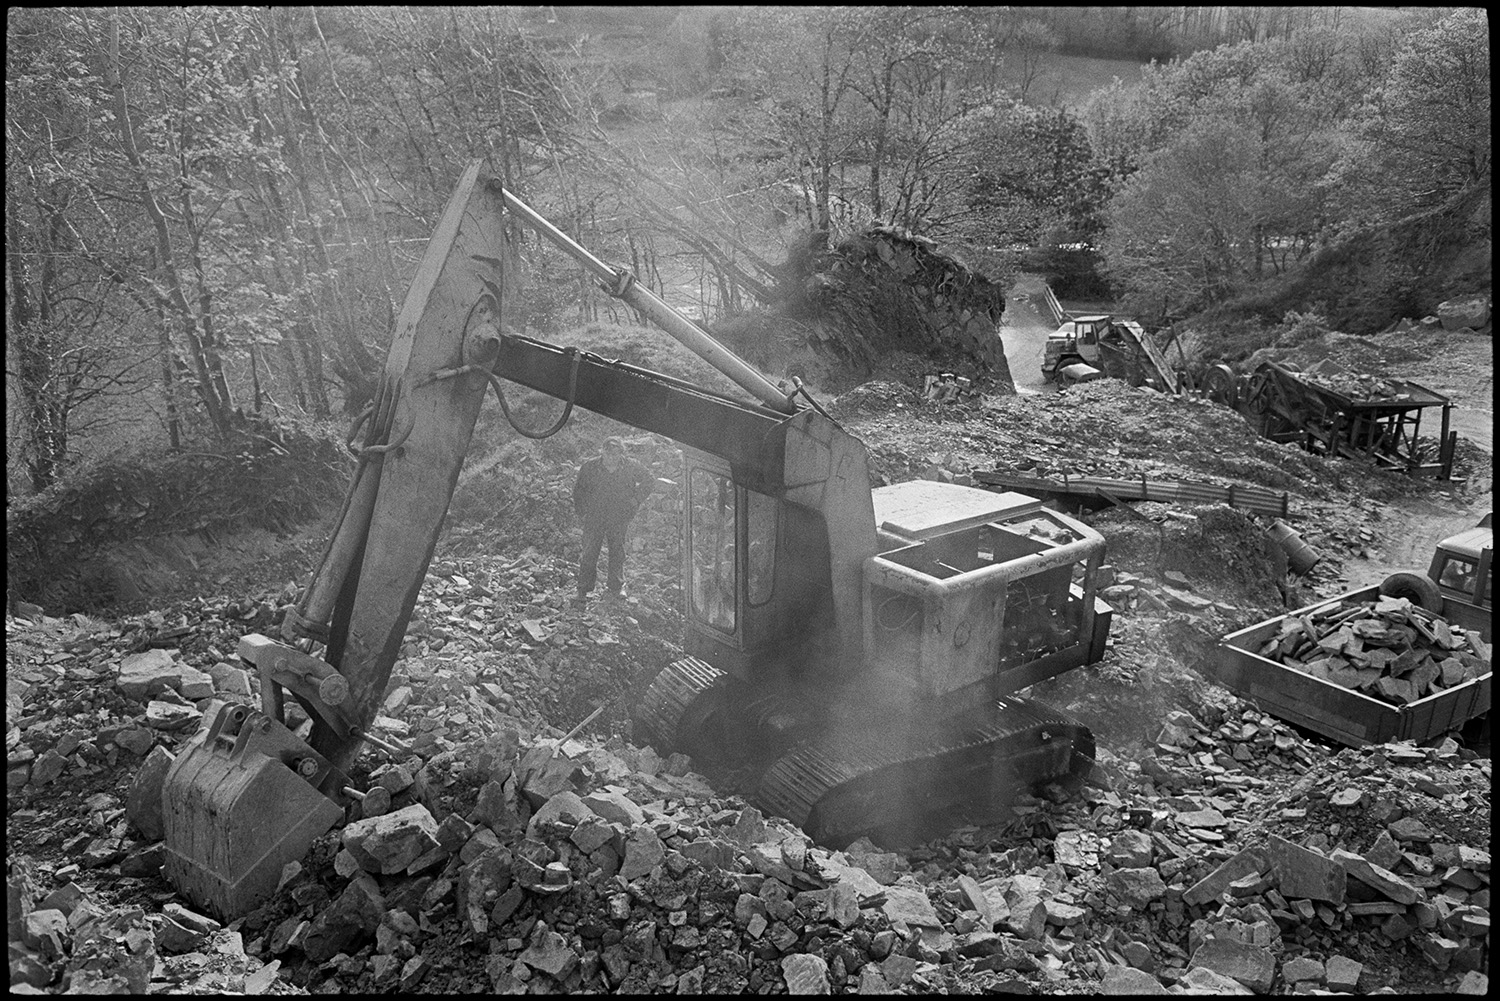 Men using mechanical shovel in quarry. Excavator.
[Dennis Harris and Harold Glover working with an excavator at Newbridge Quarry, Dolton. Dennis Harris is watching while Harold Glover works the digger to move a  pile of stone. A lorry is loaded with stone in the background and the entrance to the quarry can be seen amongst trees.]